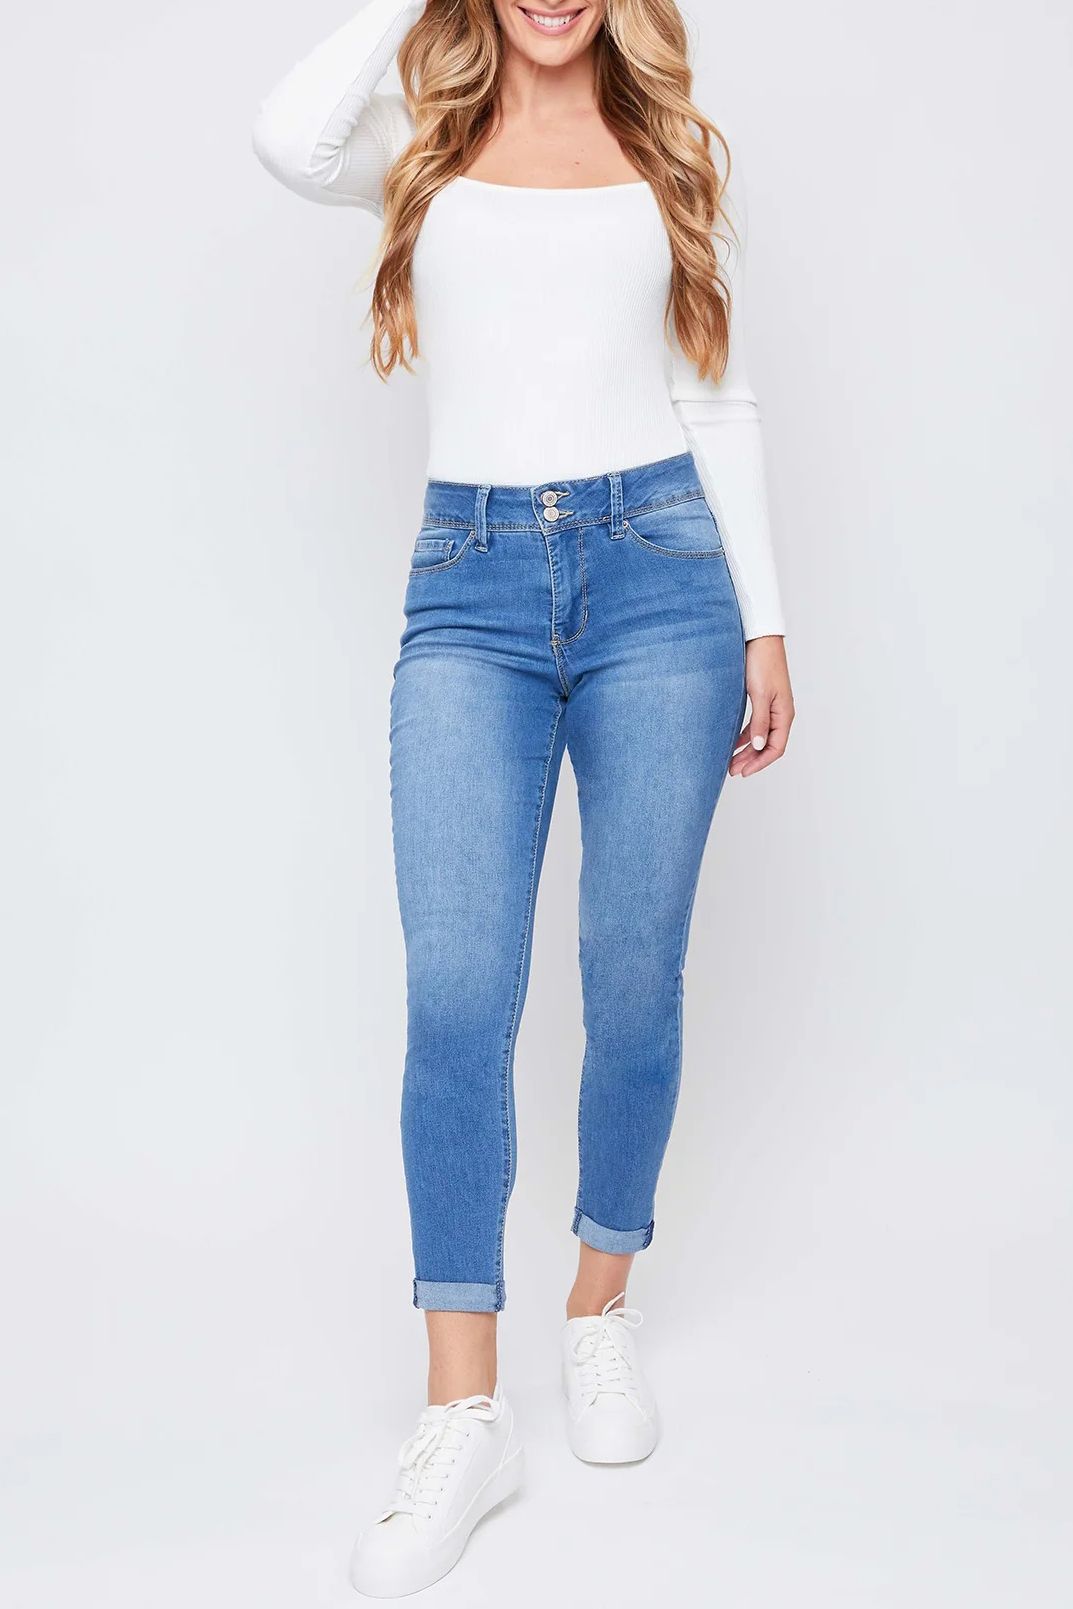 Royalty For Me High Rise Tummy Control Women's Jeans